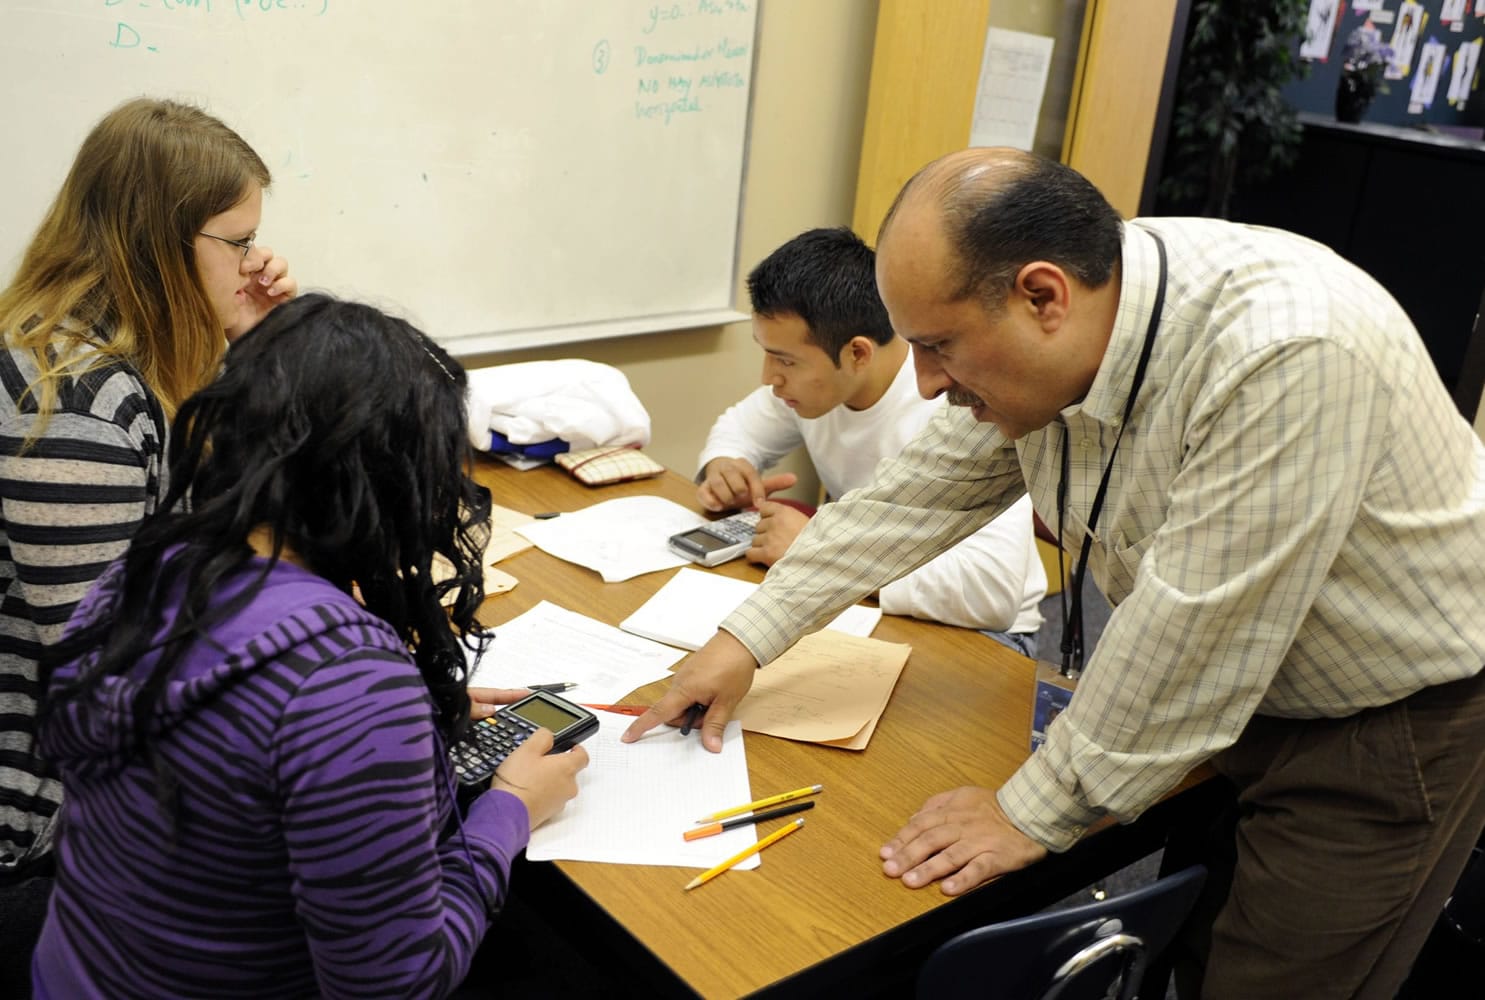 Jesus Angarita, right, works with Wilmer Lorenzo, center, Naomi Bircea, far left, and Nelly Medina in his office at Mountain View High School.